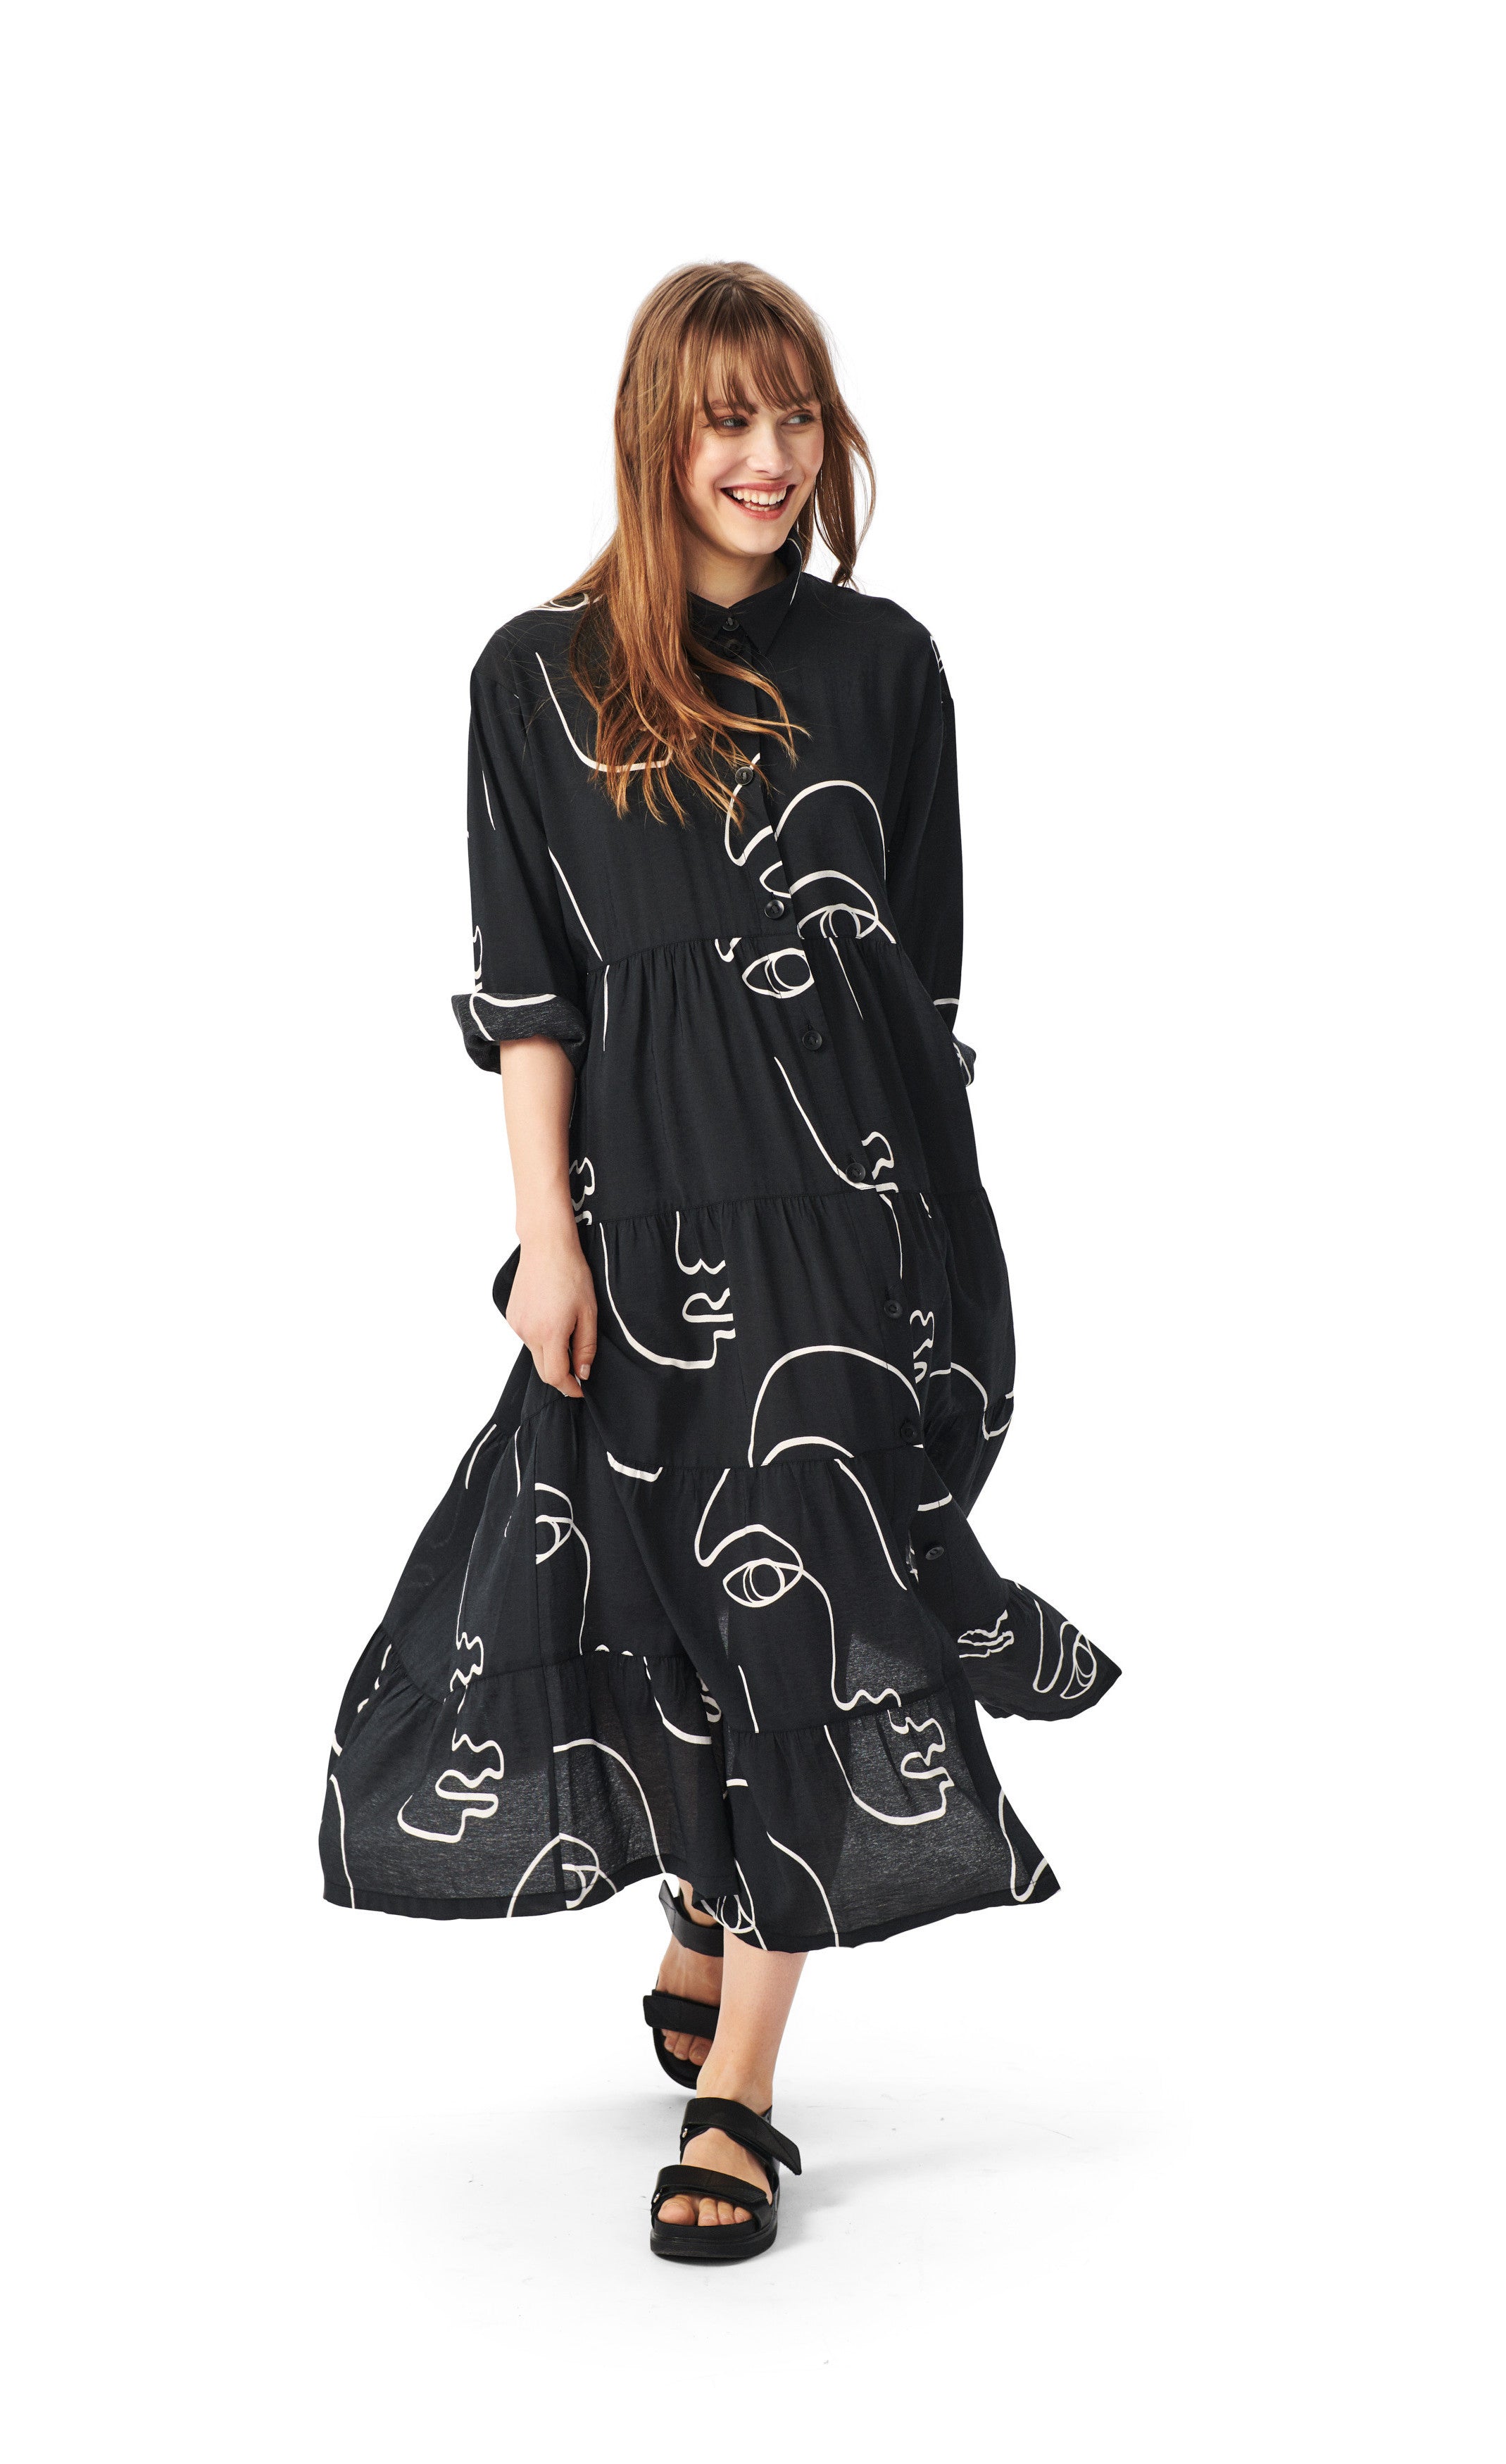 Front full body view of a woman wearing the bitte kai rand sketch viscose long dress. This dress is black with white sketches of faces all over it. The dress has a button up front, a collar, long sleeves that are folded up, and a ruffled bottom half.